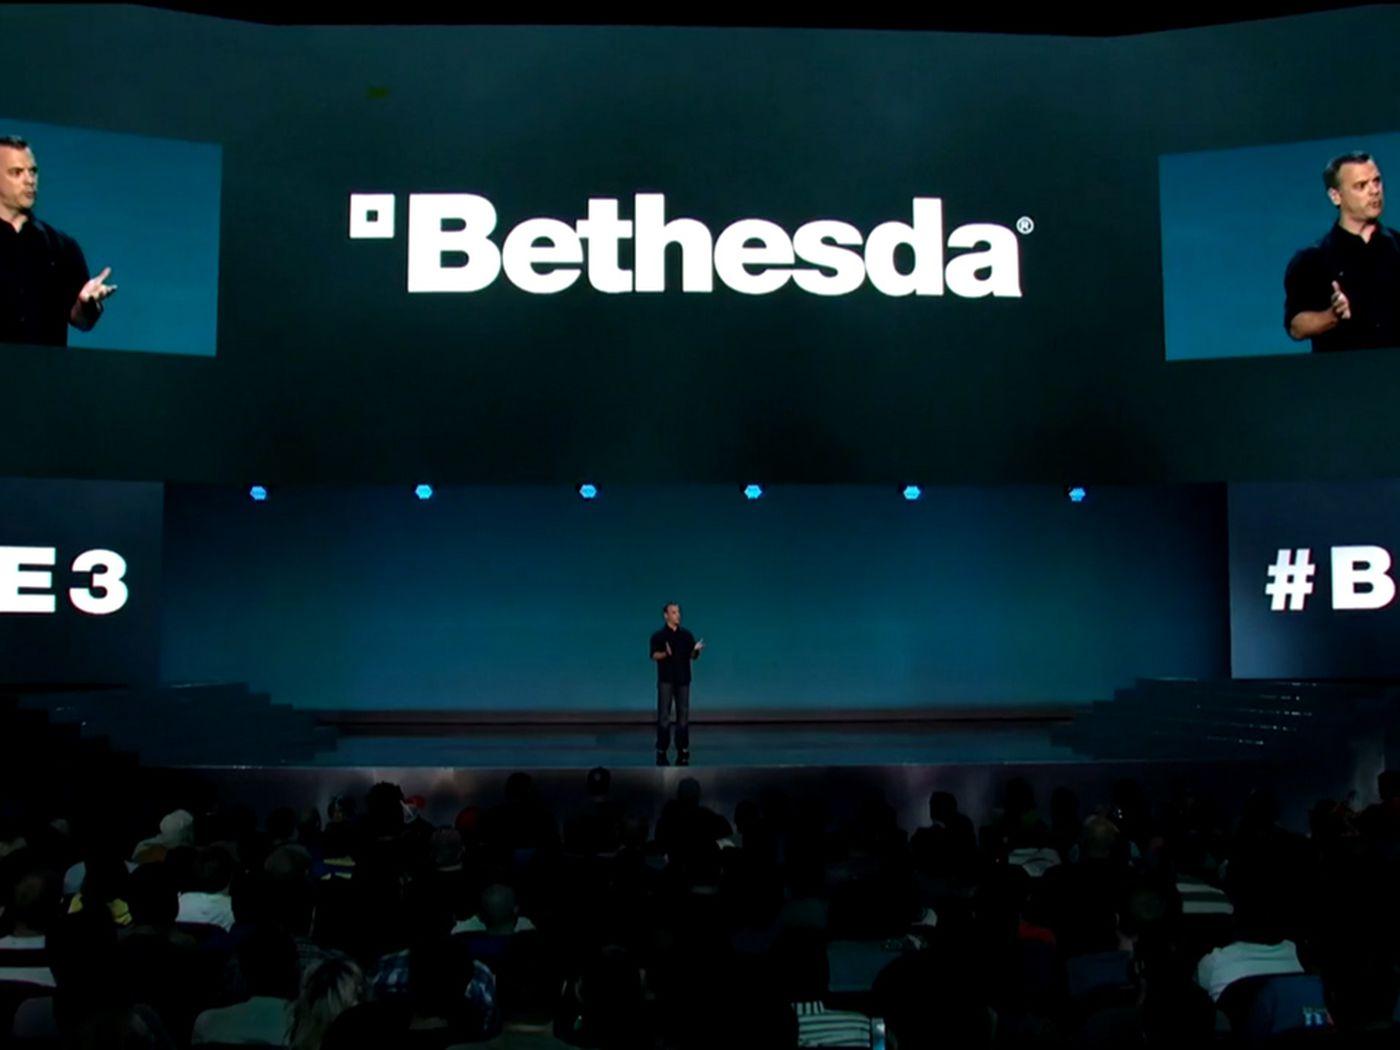 Bethesda's E3 2018 press conference: start time, and live stream